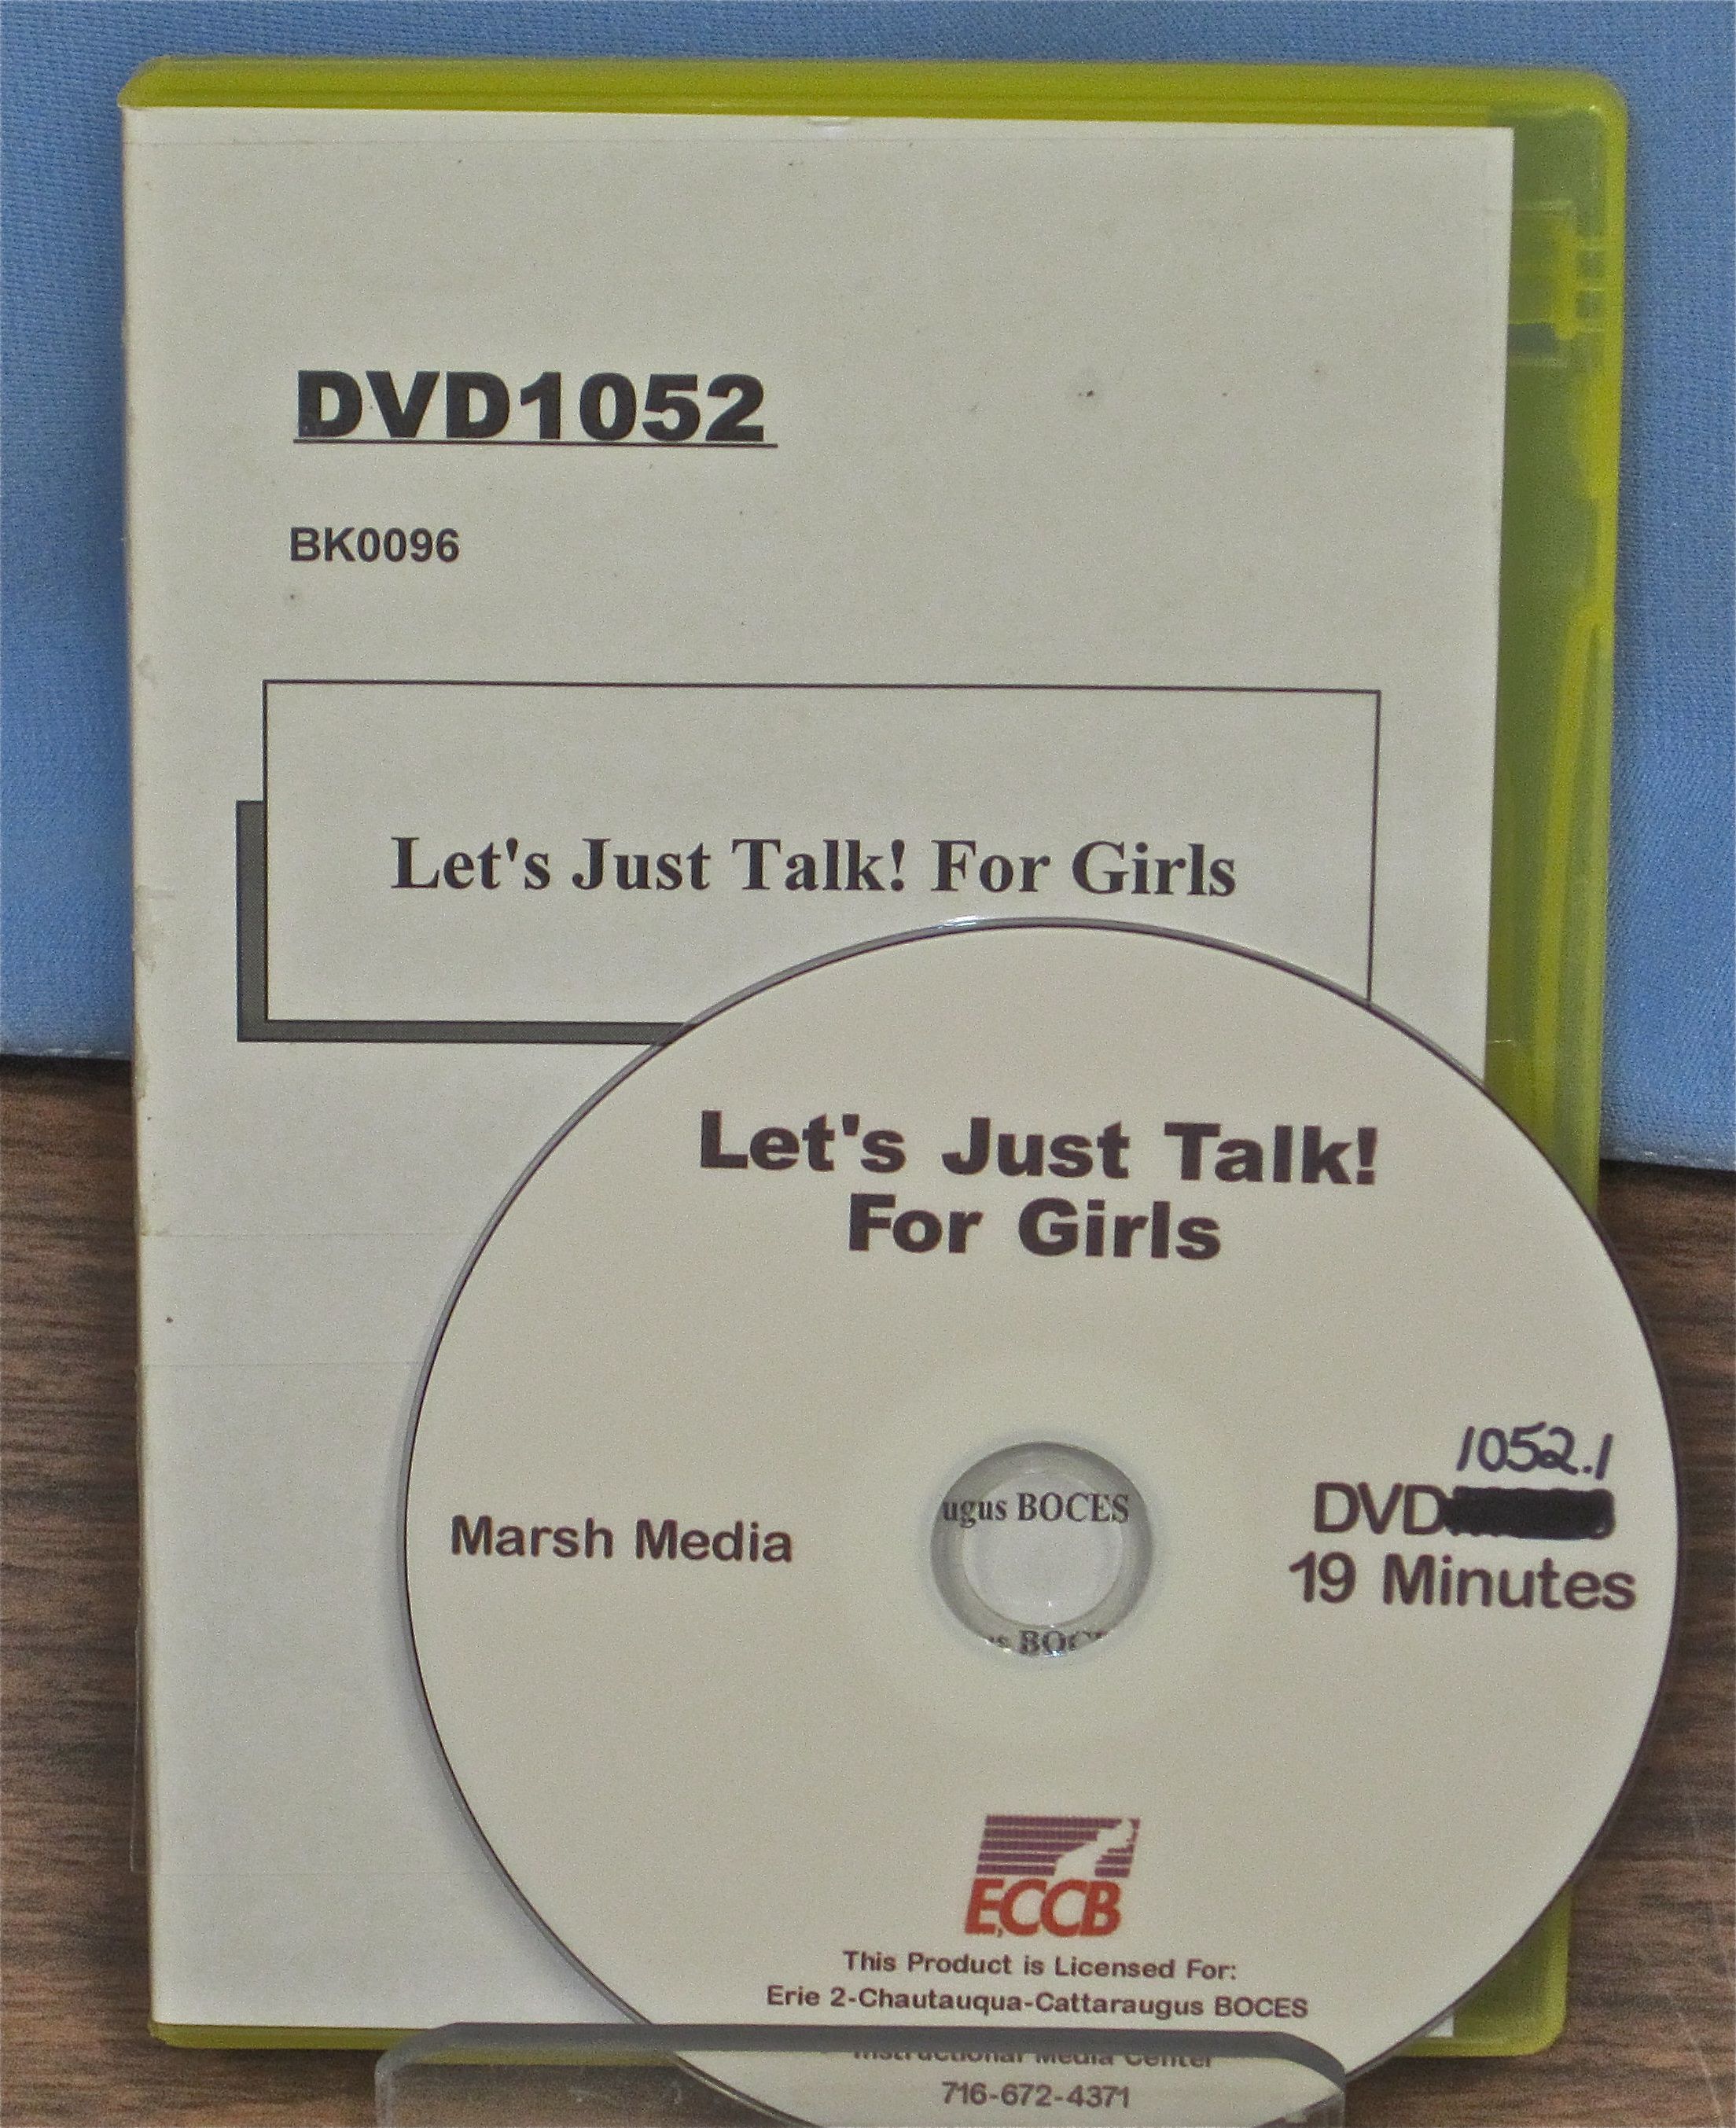 Let's Just Talk! For Girls